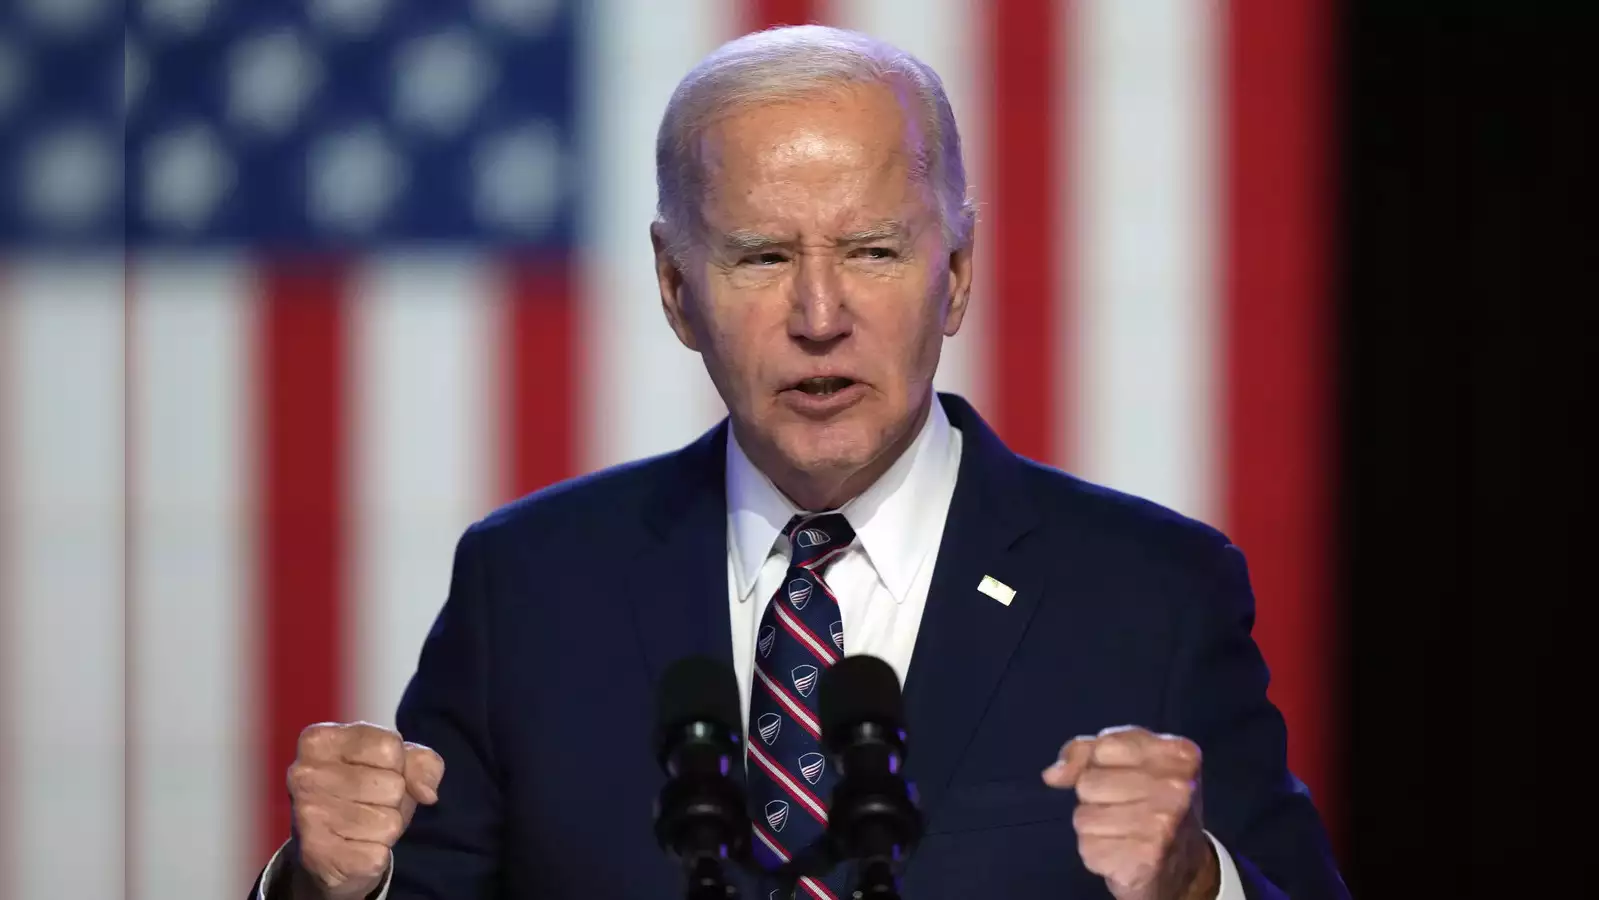 Democratic Party explores options to secure Biden's presence on ballots (Credits: AP Photo)